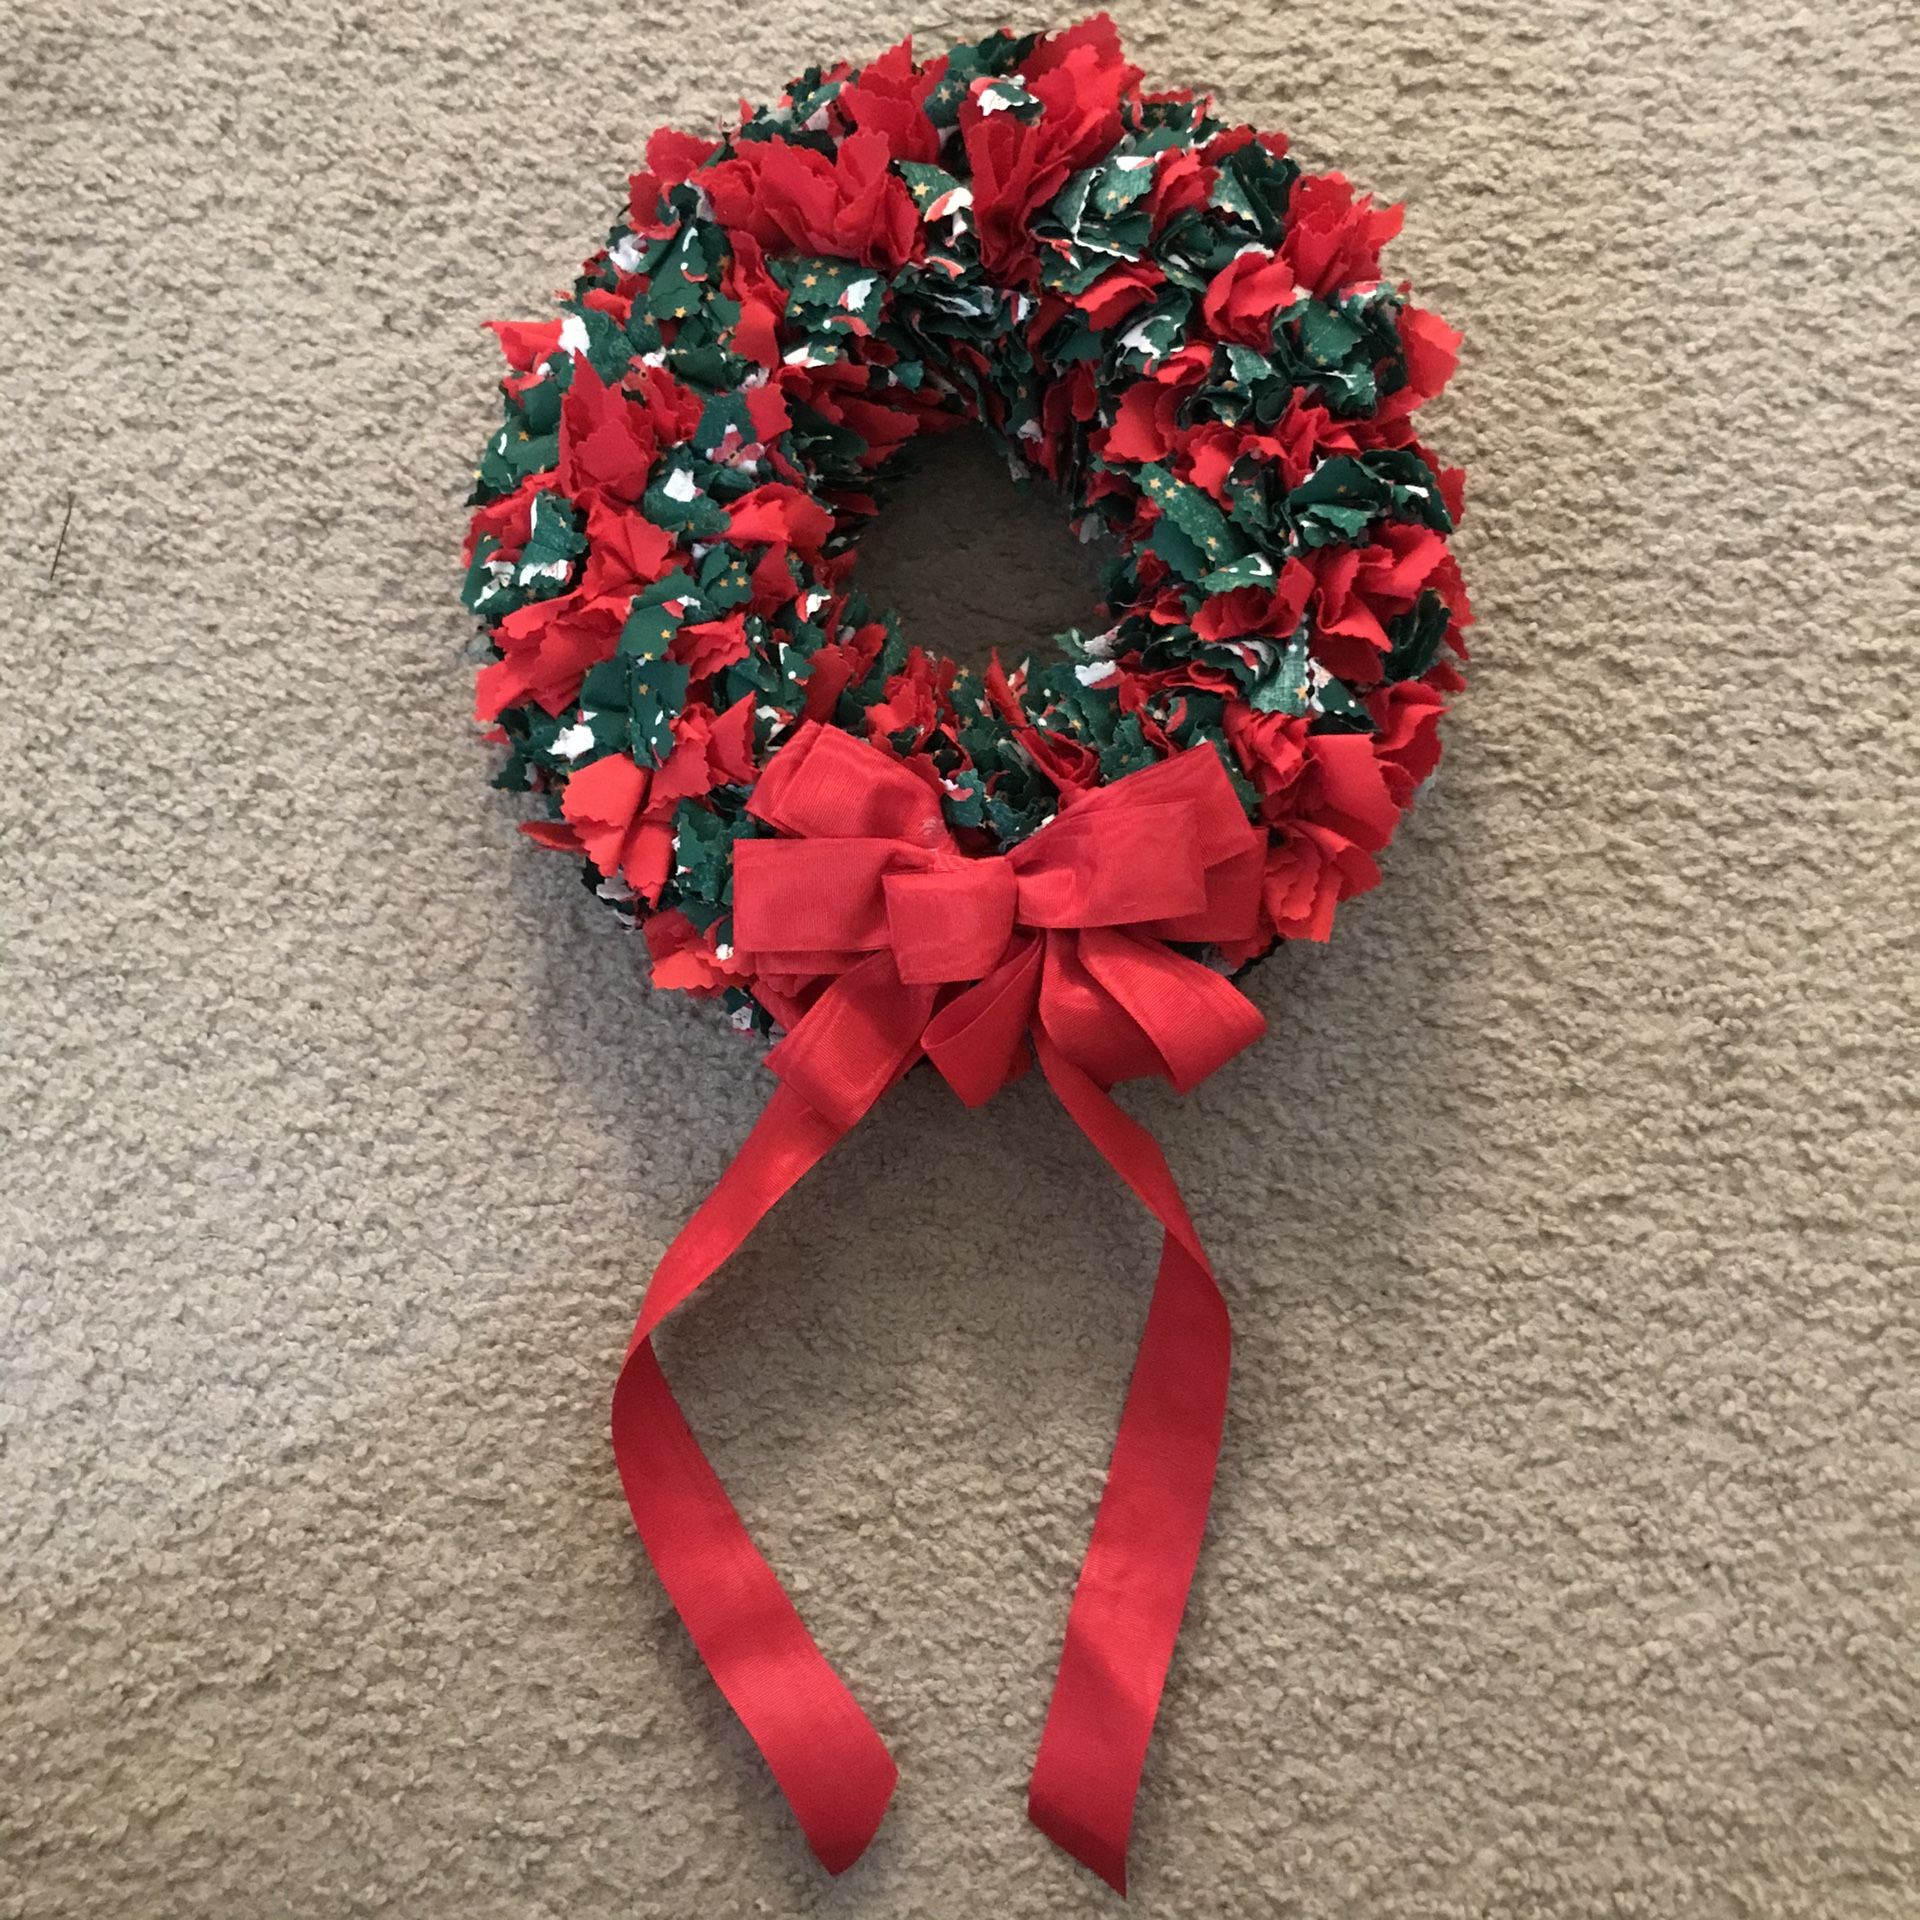 🎄12” Fabric wreath #see My Other Deals